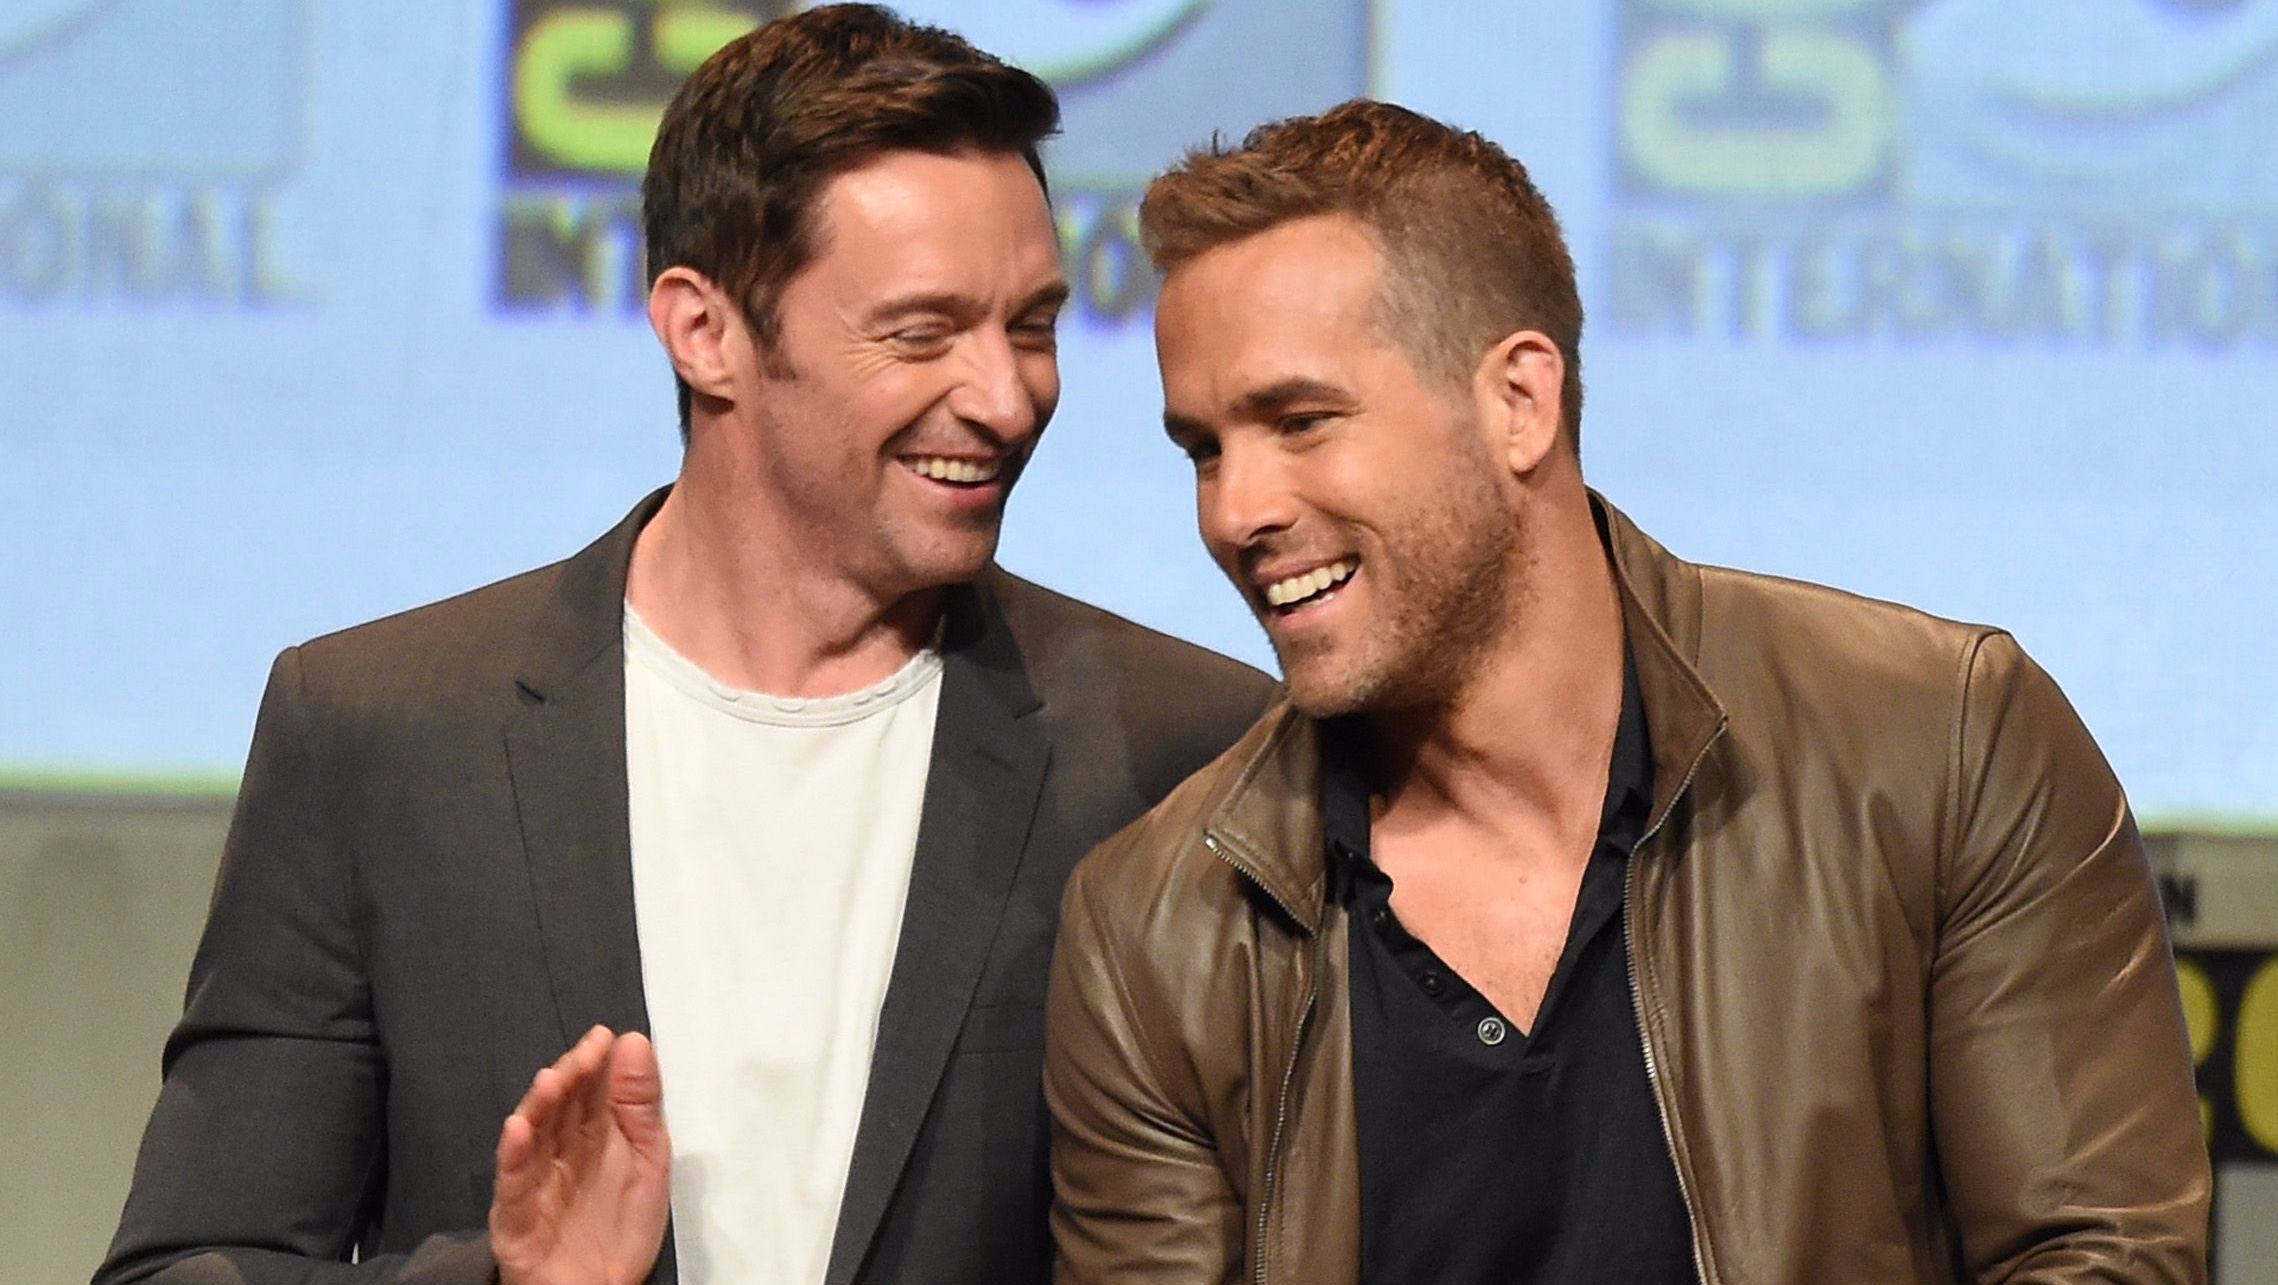 Hugh Jackman laughs with Ryan Reynolds in a brown jacket.